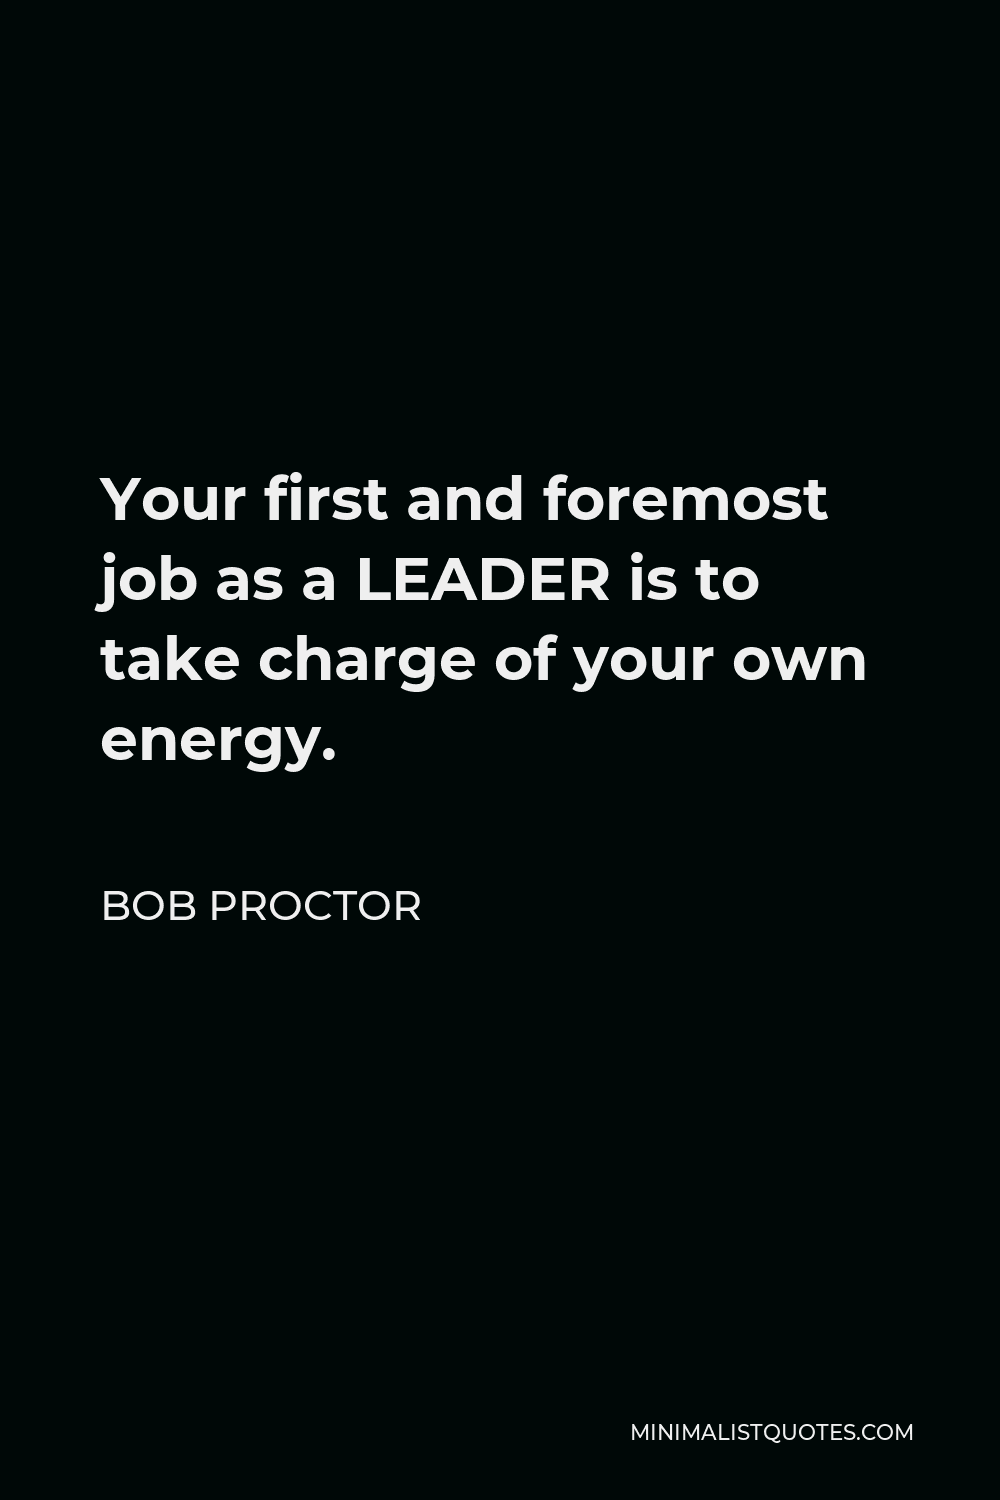 Bob Proctor Quote - Your first and foremost job as a LEADER is to take charge of your own energy.